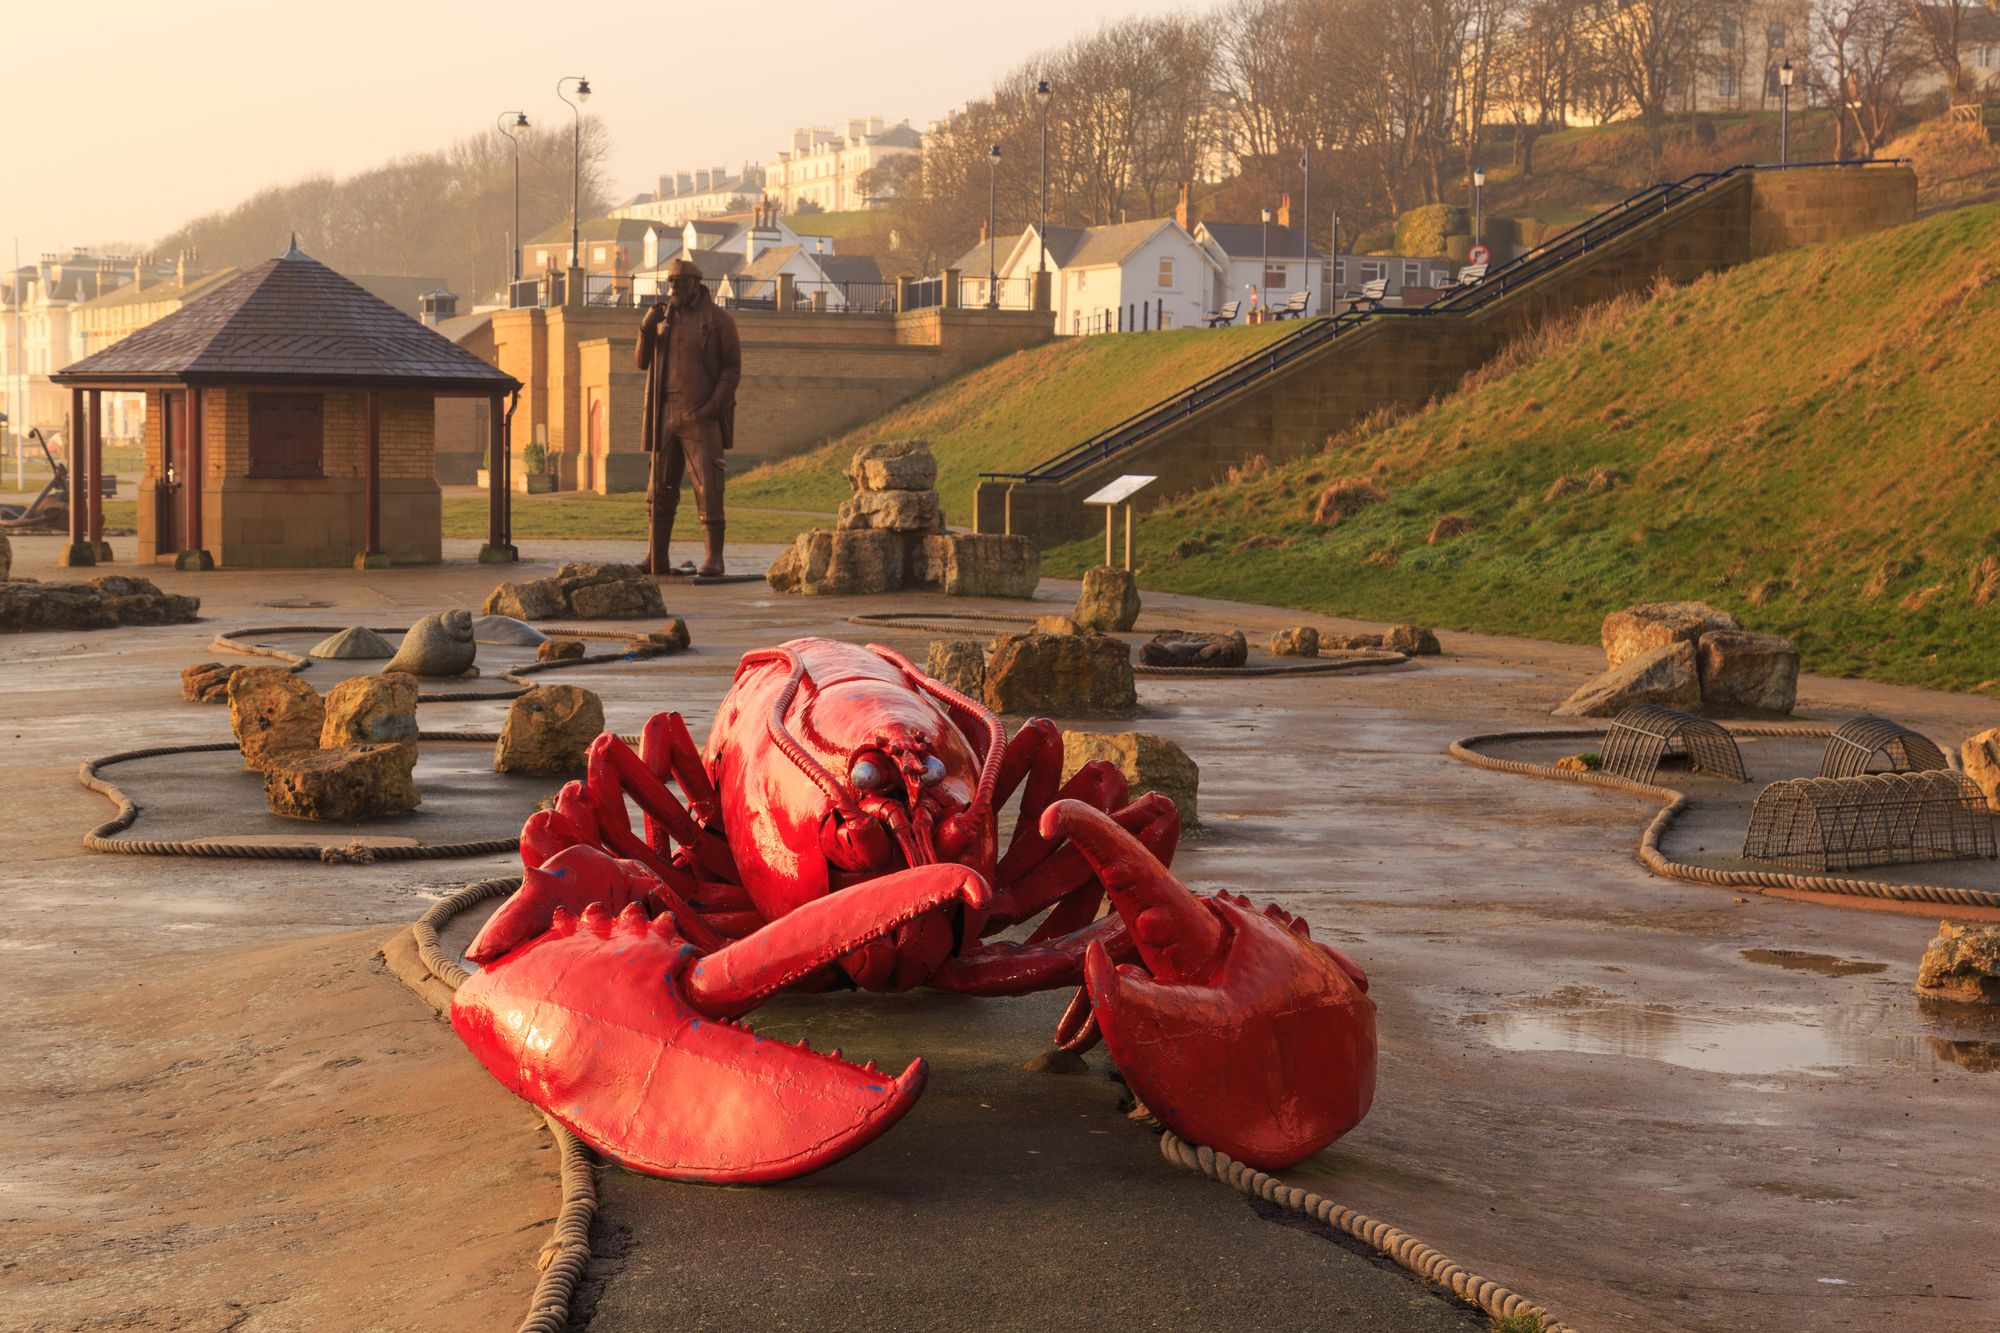 Large lobster sculpture on the mini golf course on the coast of Filey beach